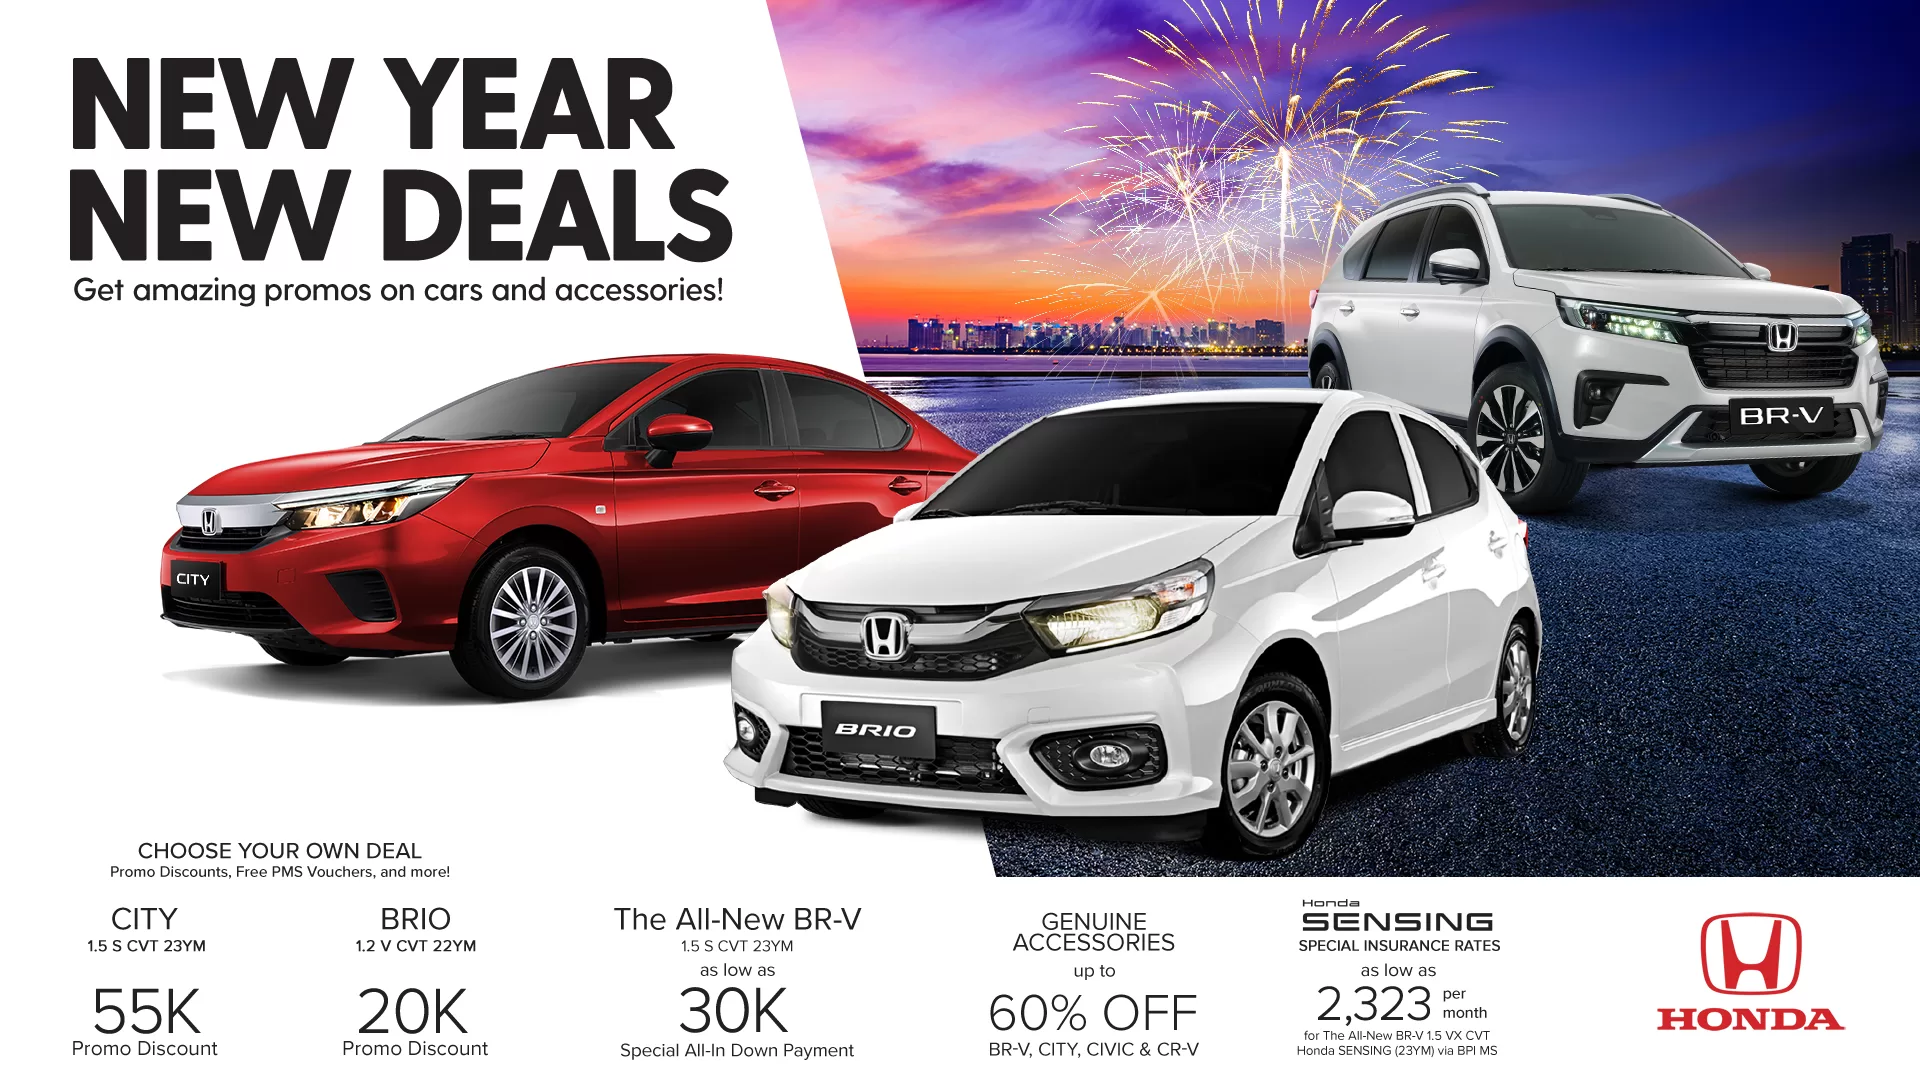 Honda PH extends New Year, New Deals promo for City and Brio